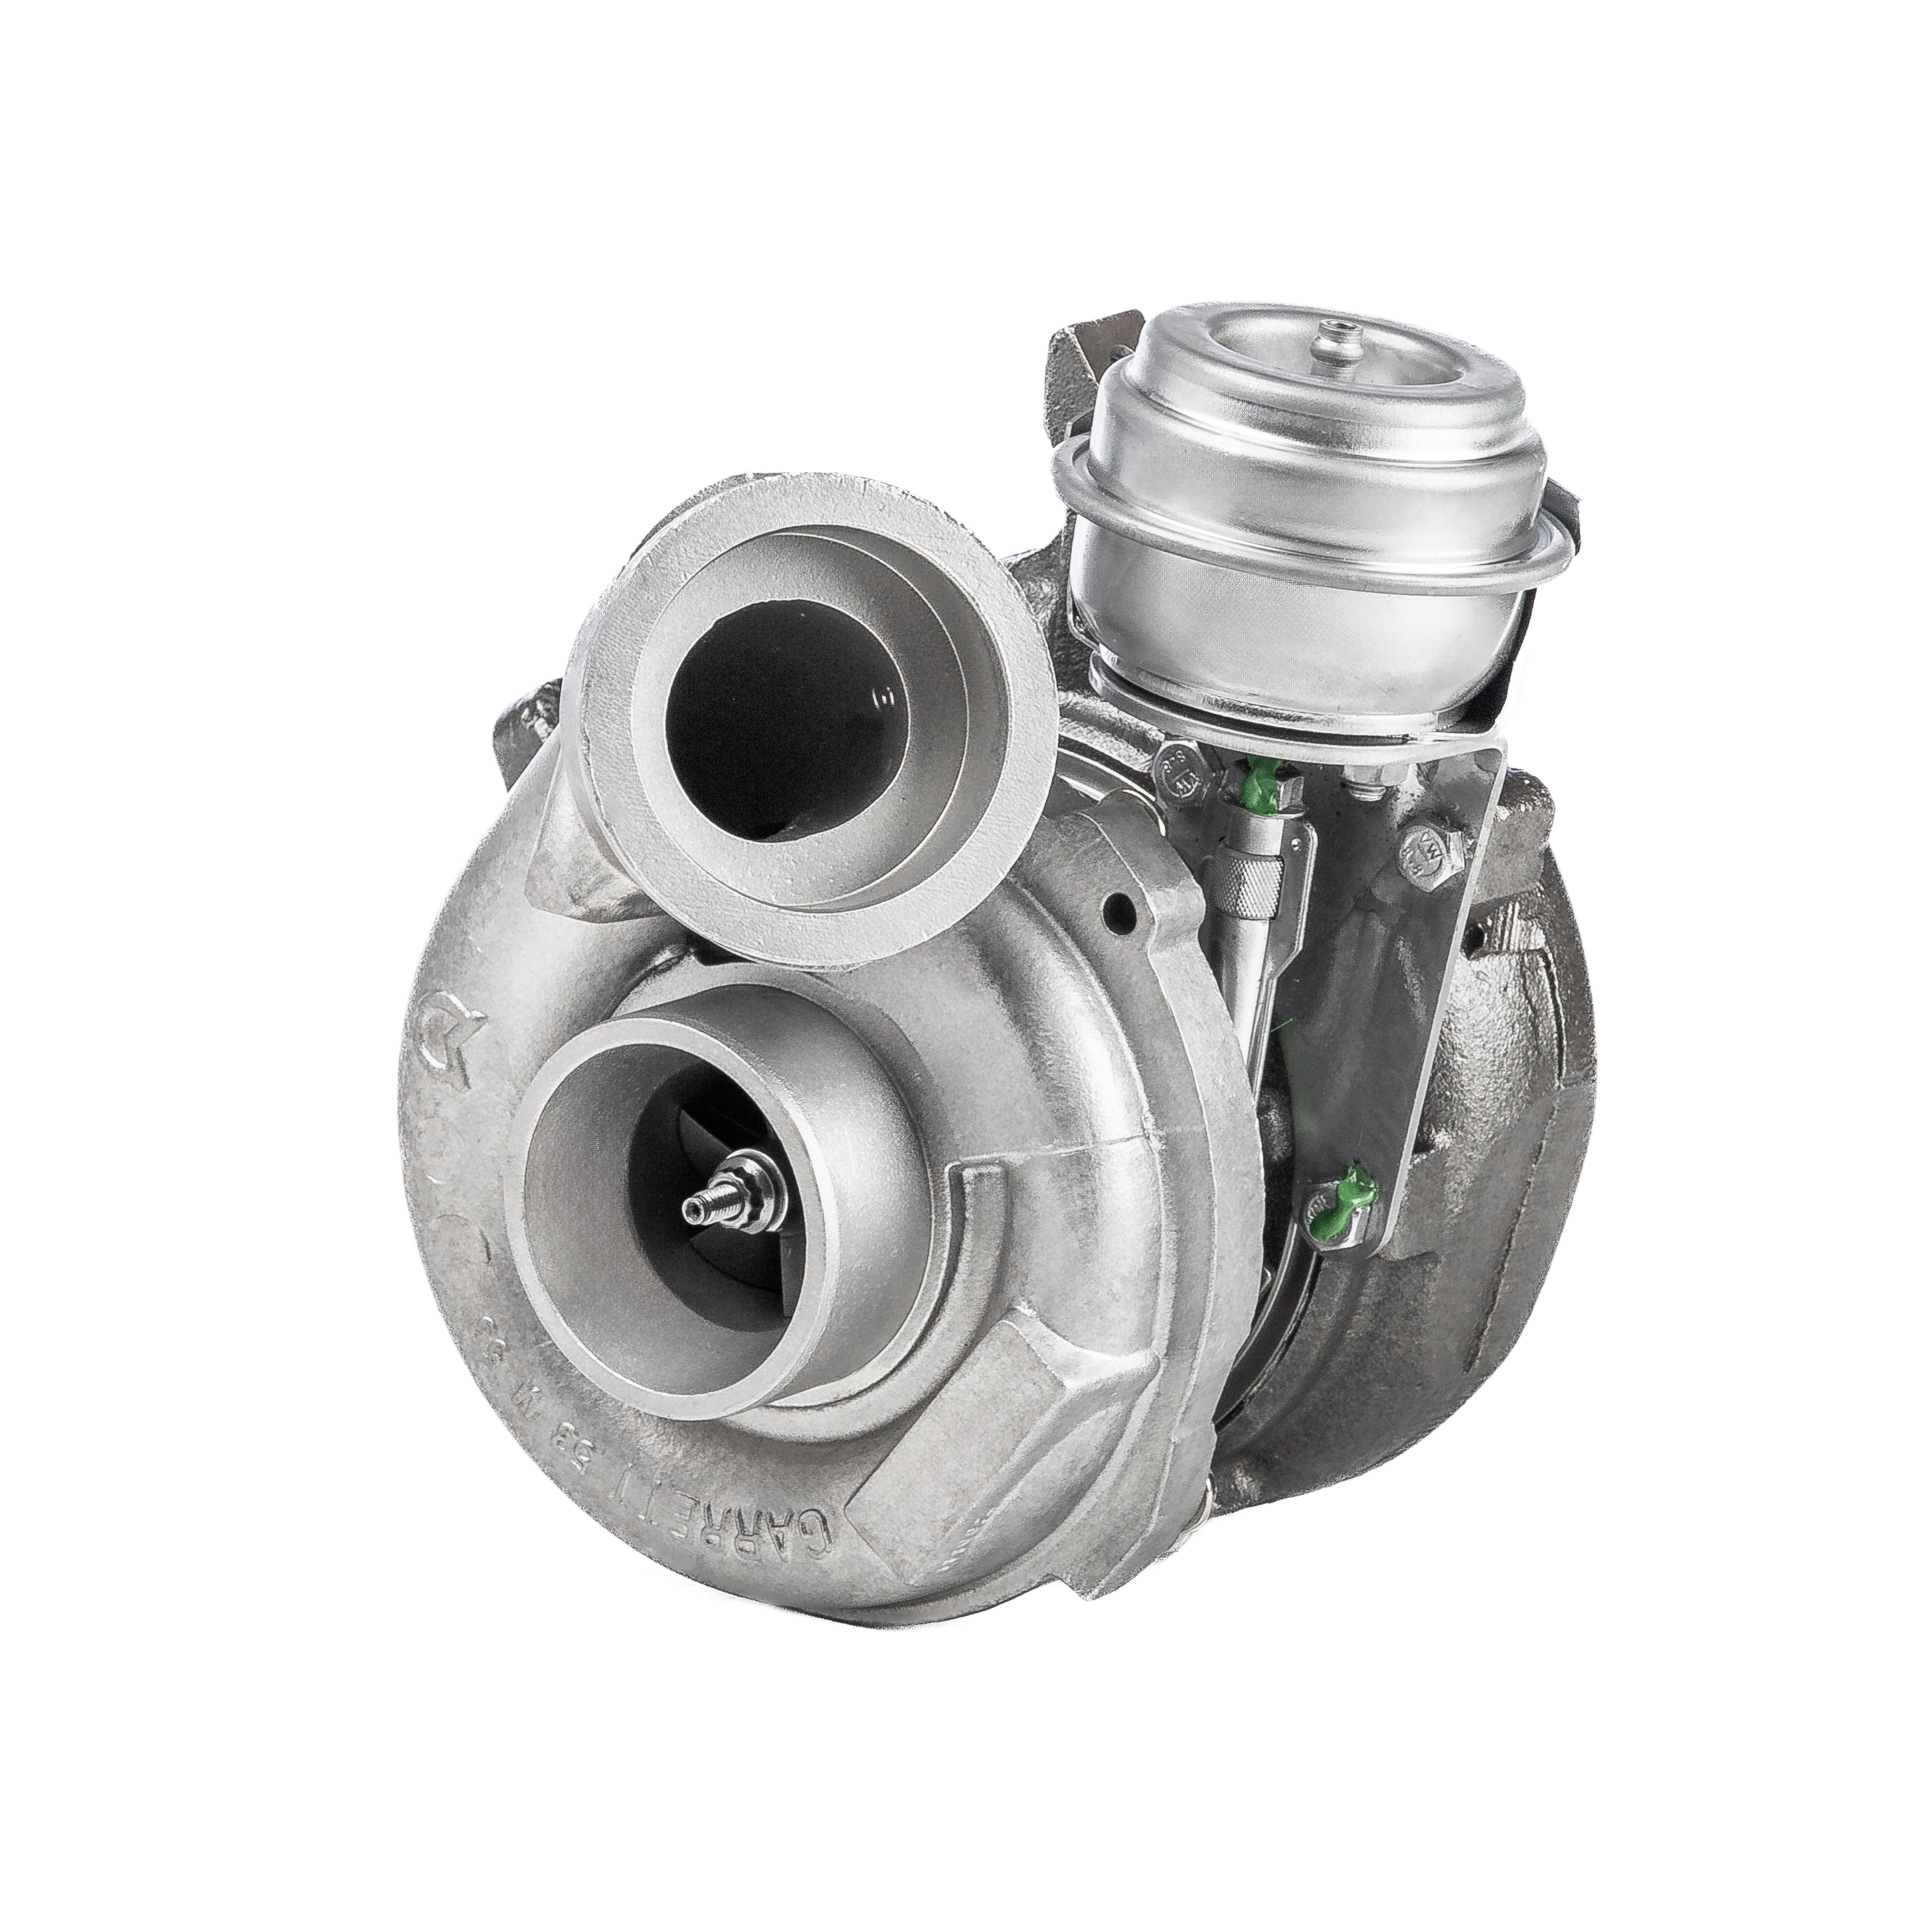 BR Turbo 709838-5001RS Turbocharger A 612 096 03 99 80